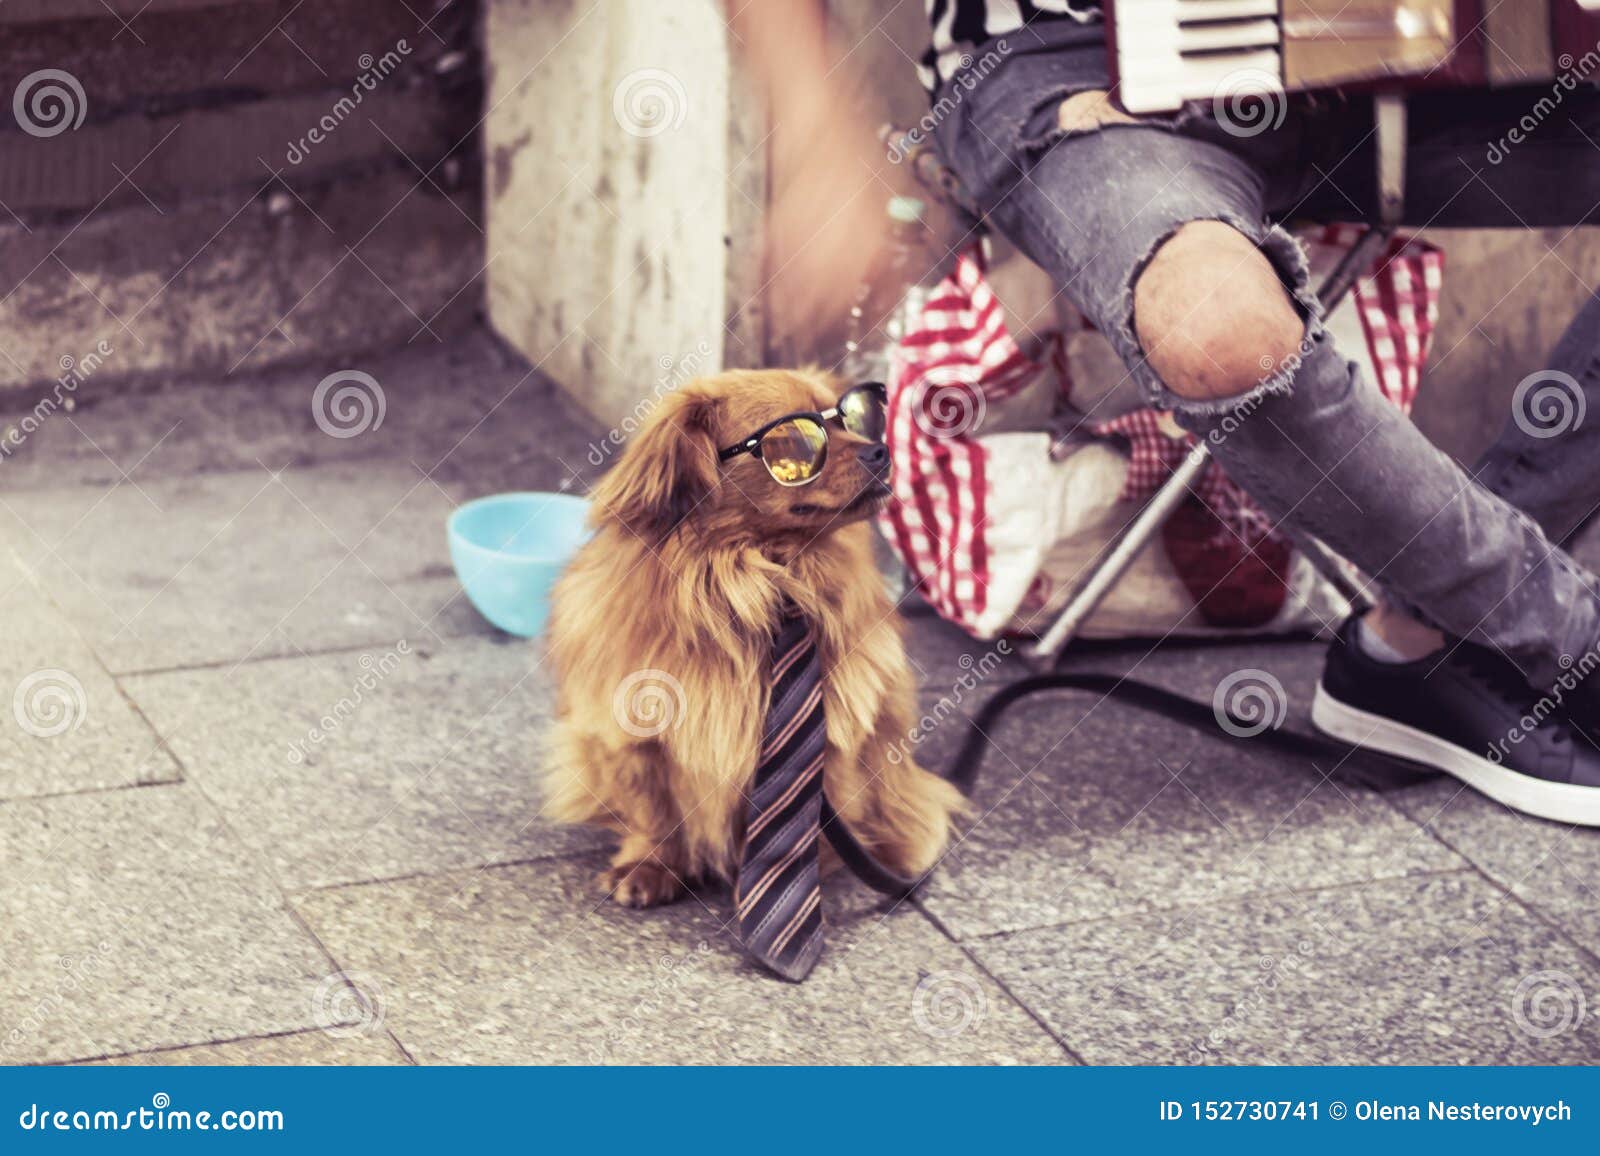 street musician, busker with dog in glasses and tie in krakow, poland